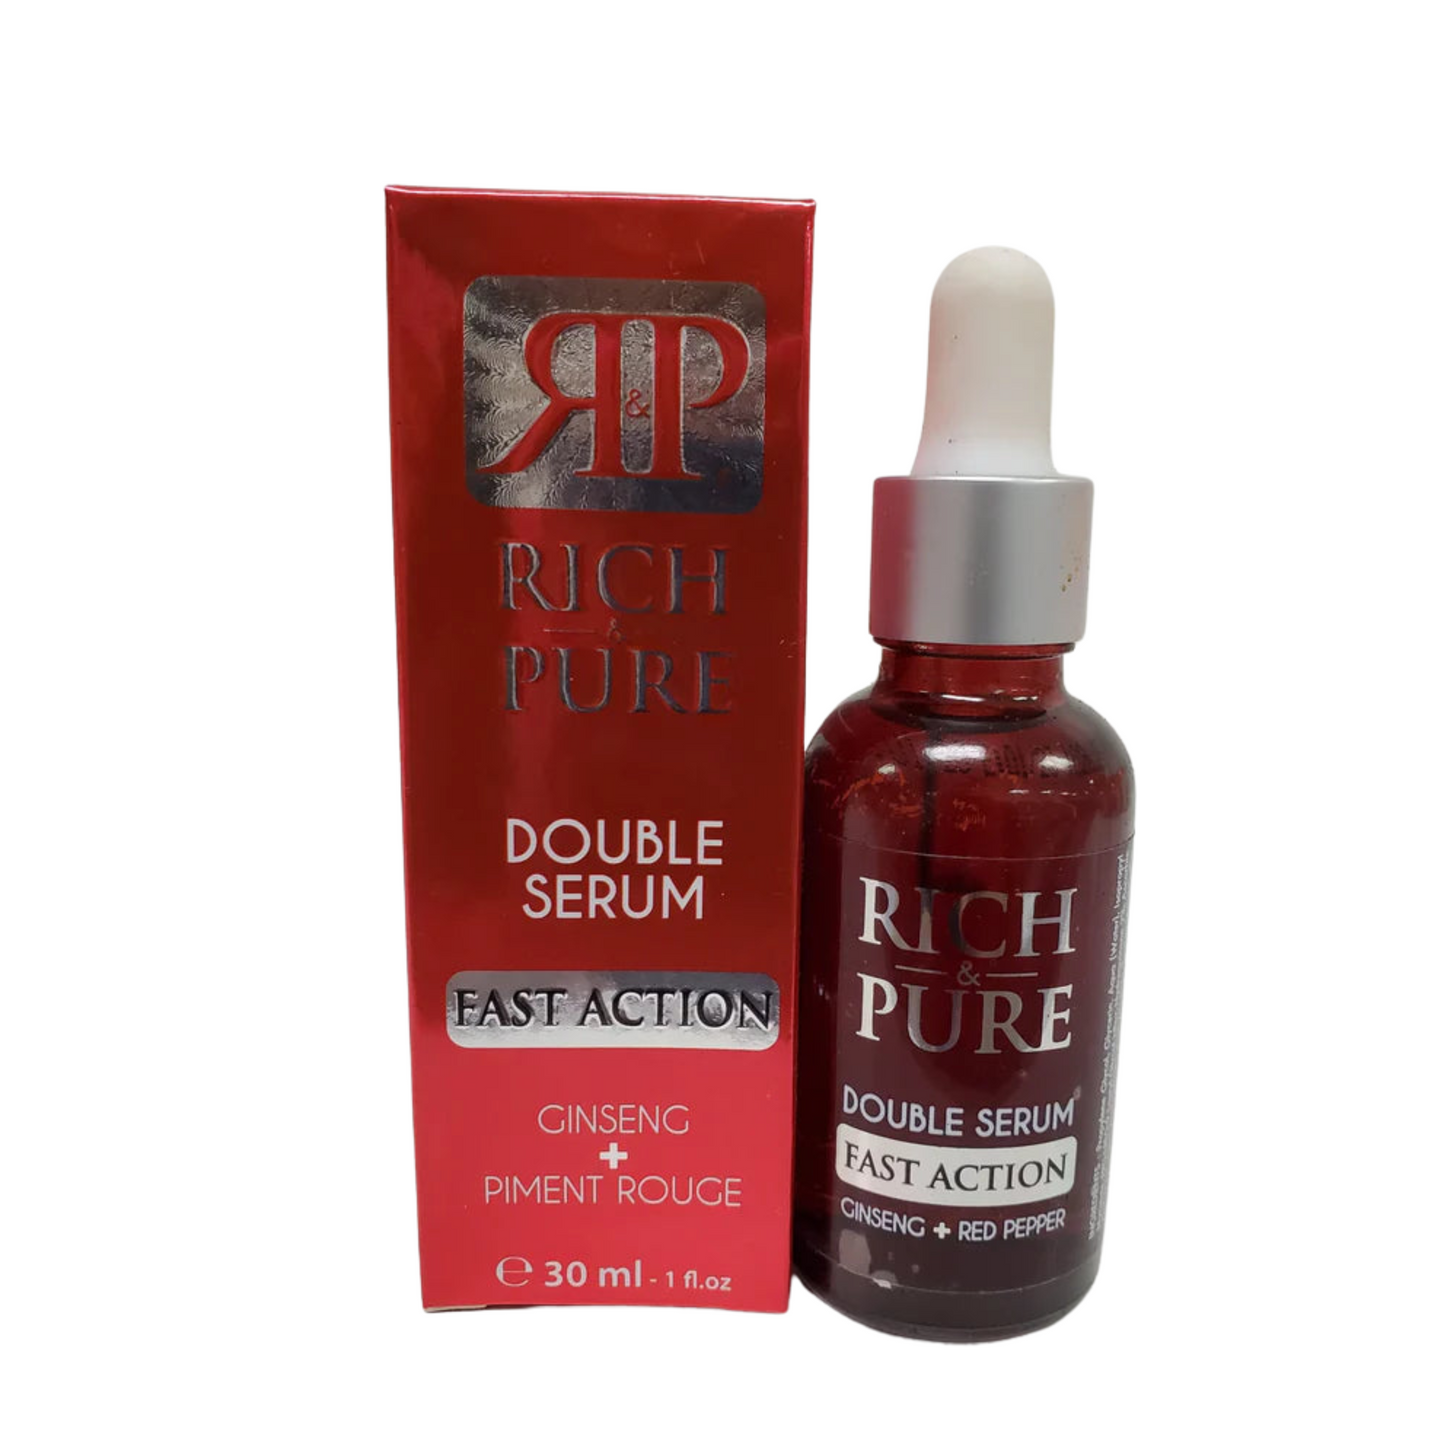 Rich & Pure Double Serum Fast Action